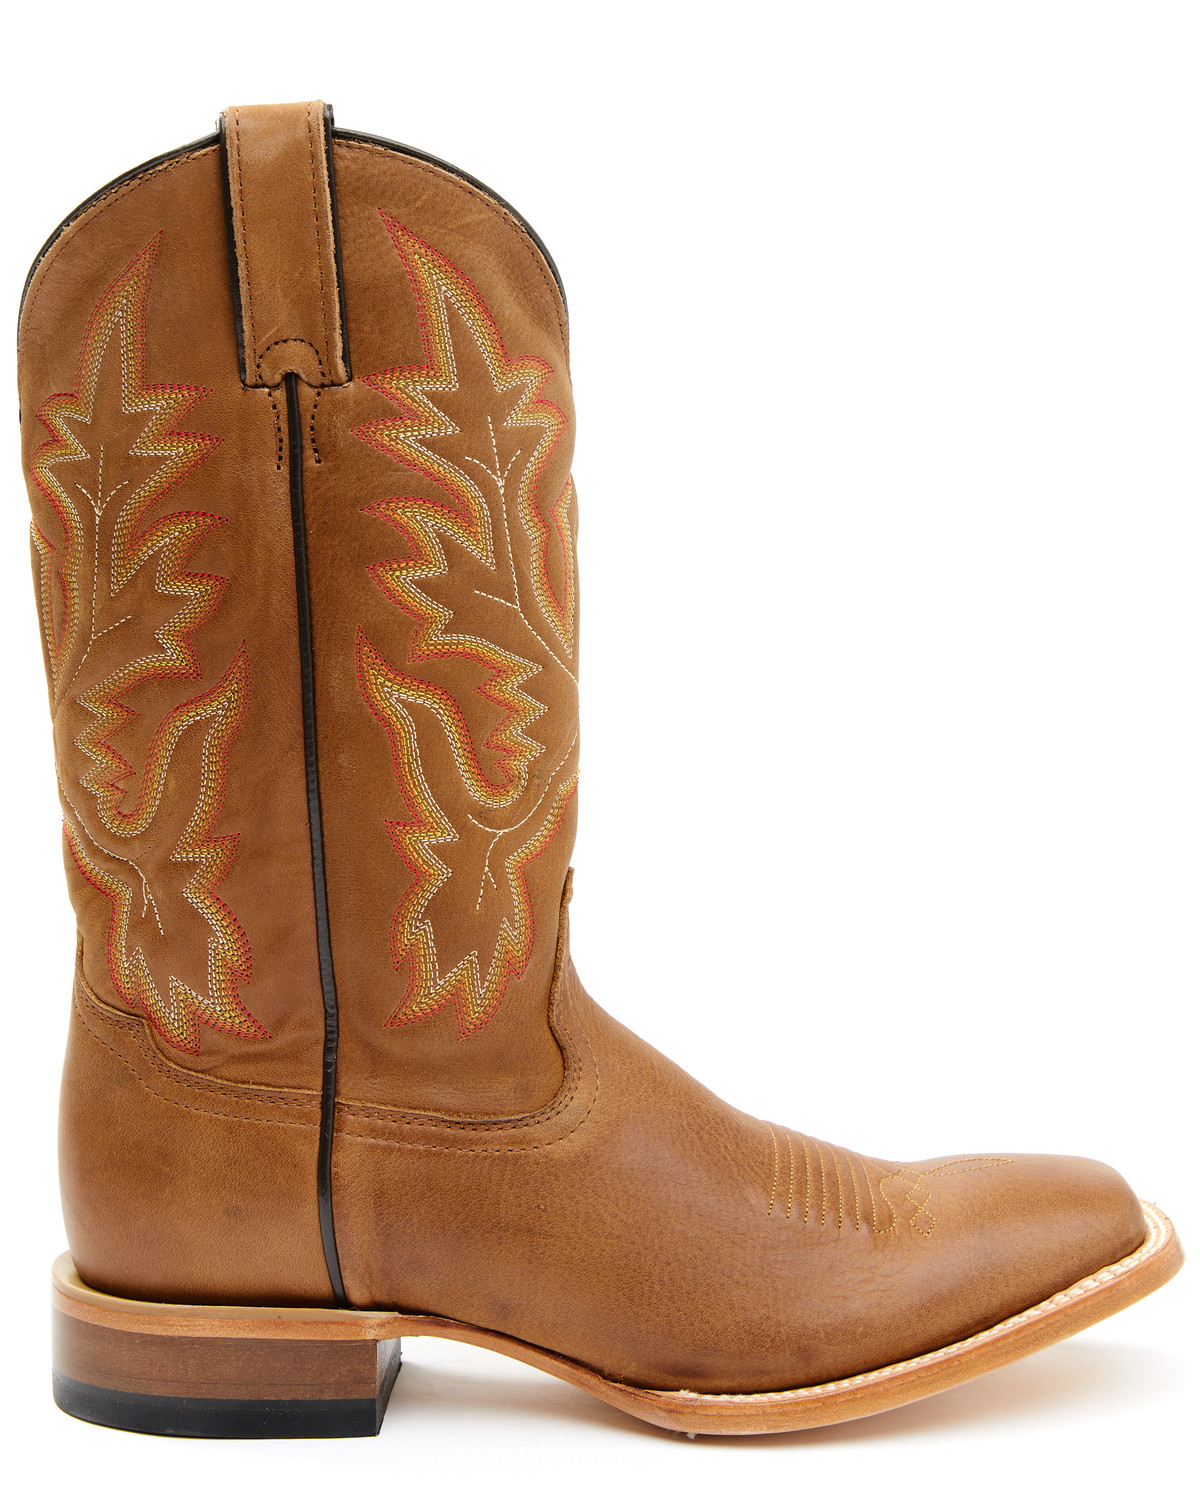 Cody James Men's Brown Stockman Cowboy Boots - Wide Square Toe | Sheplers